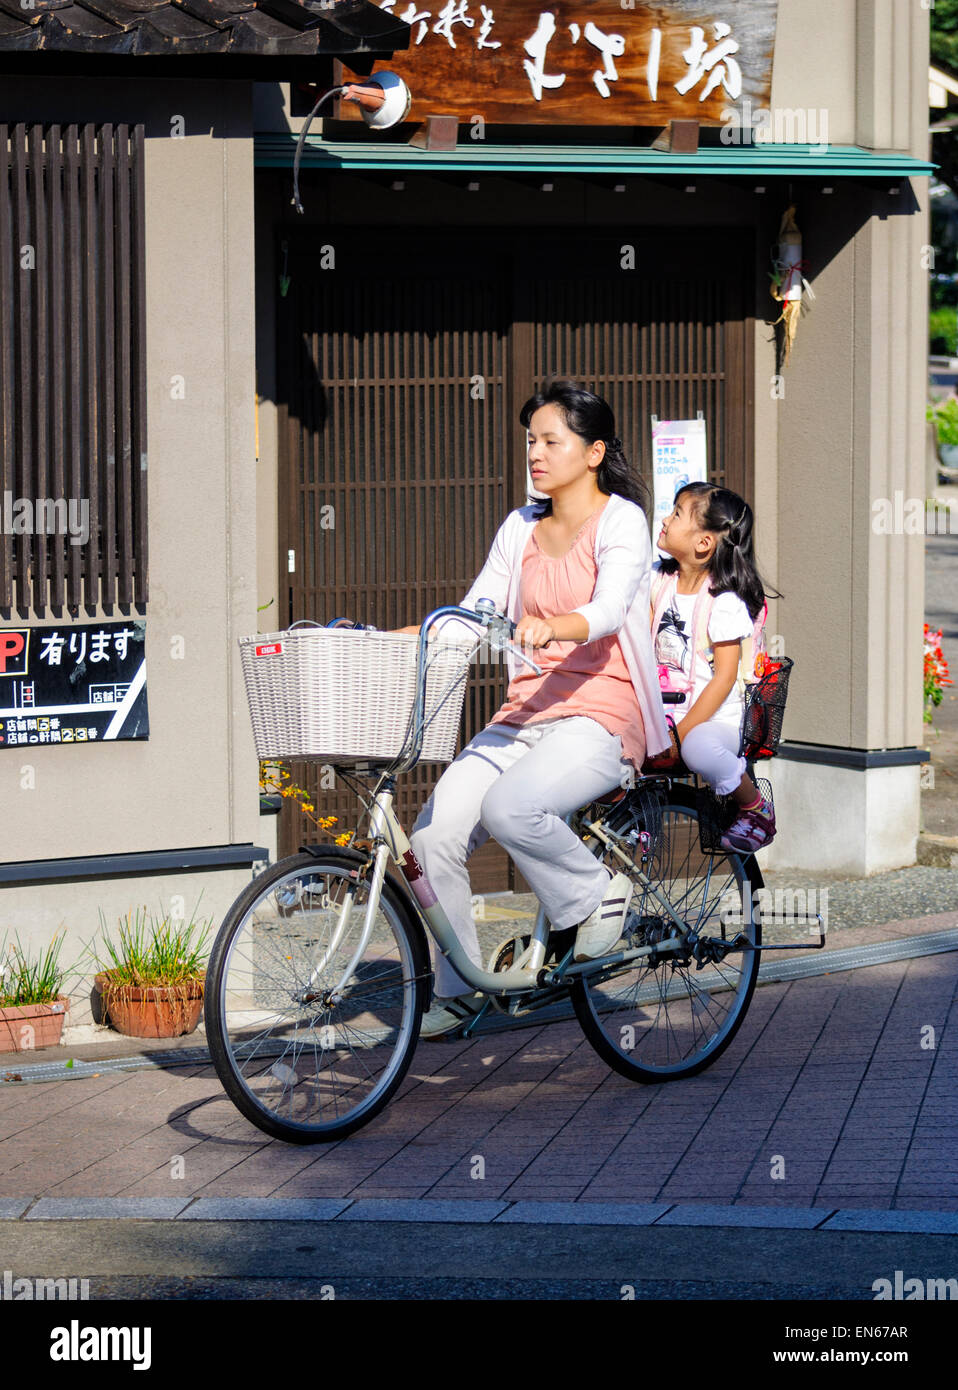 It's common to see two people riding a single bicycle in Japan - especially mothers & young children. Japanese mother  & young child; daughter; bike. Stock Photo